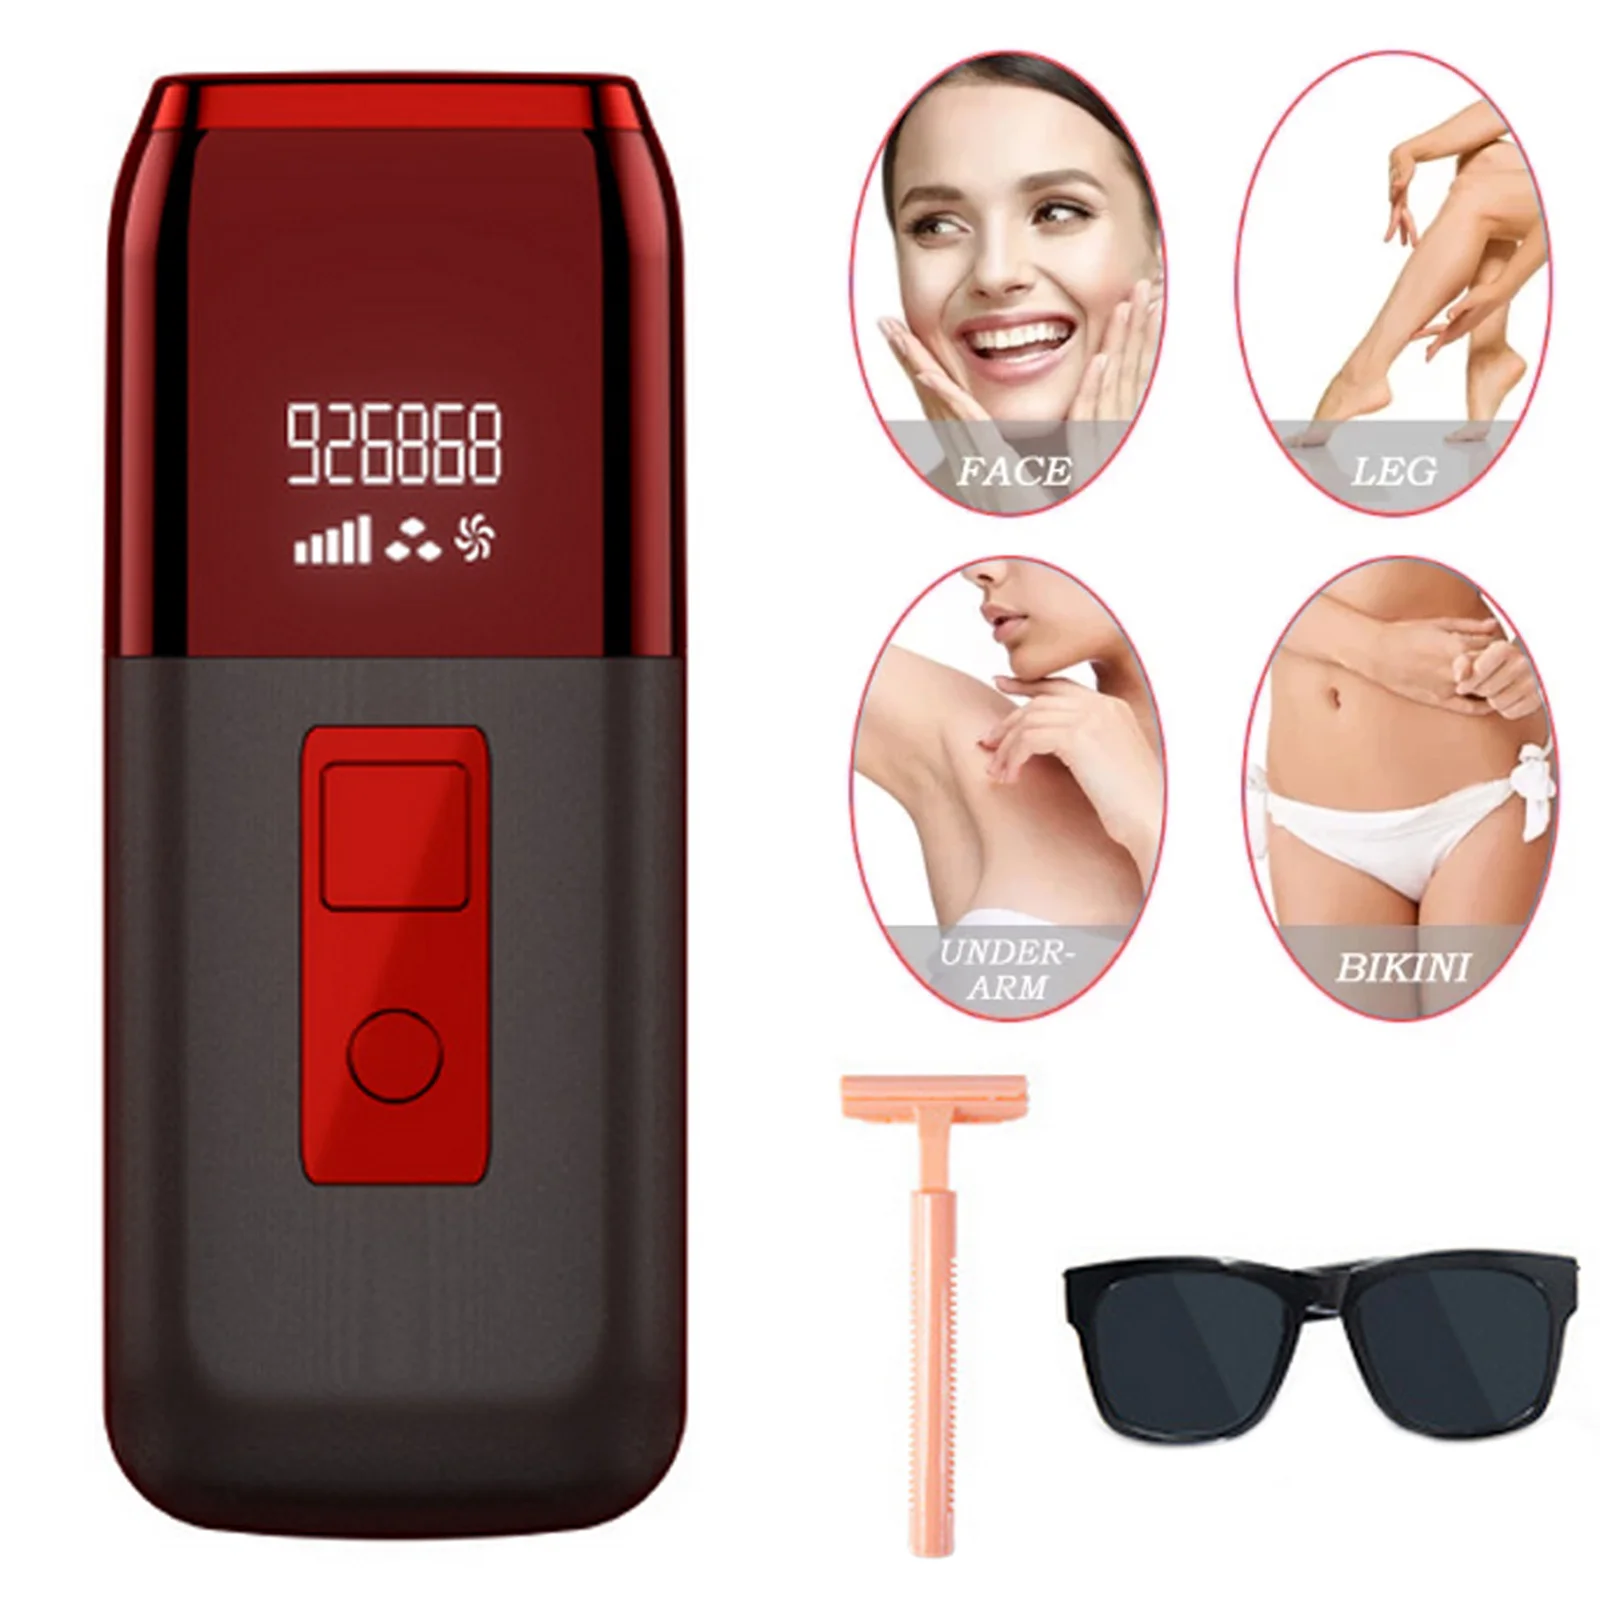 Hair Remover Portable Painless 1000000 Flashes IPL Hair Removal Device Machine with Shaver Goggles Whole Body Home Use EU Plug godox ak r22 collapsible silicone photography diffuser dome for v1 series flashes ad100pro ad200pro with h200r studio photography portrait live stream